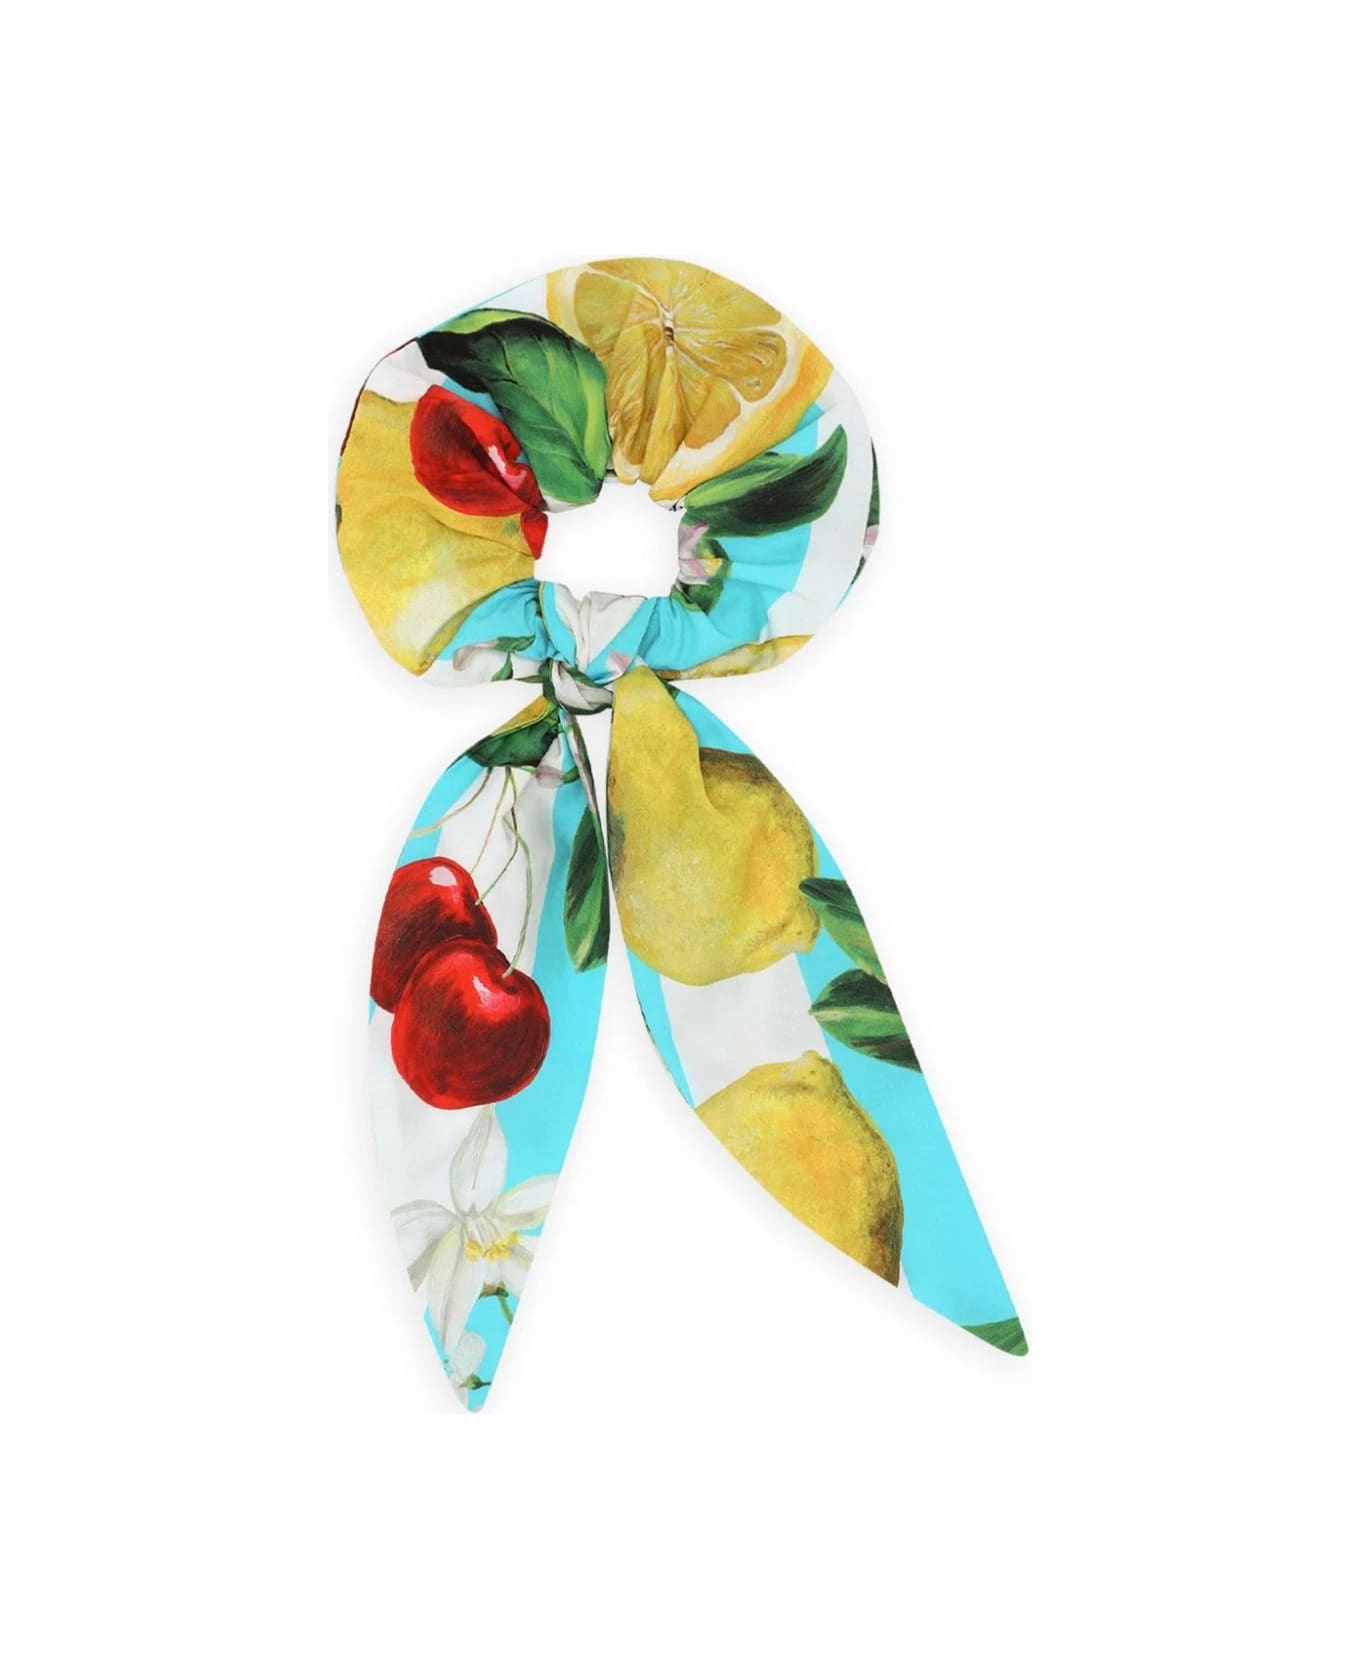 Dolce & Gabbana Scrunchie With Lemon And Cherry Print - Multicolour アクセサリー＆ギフト